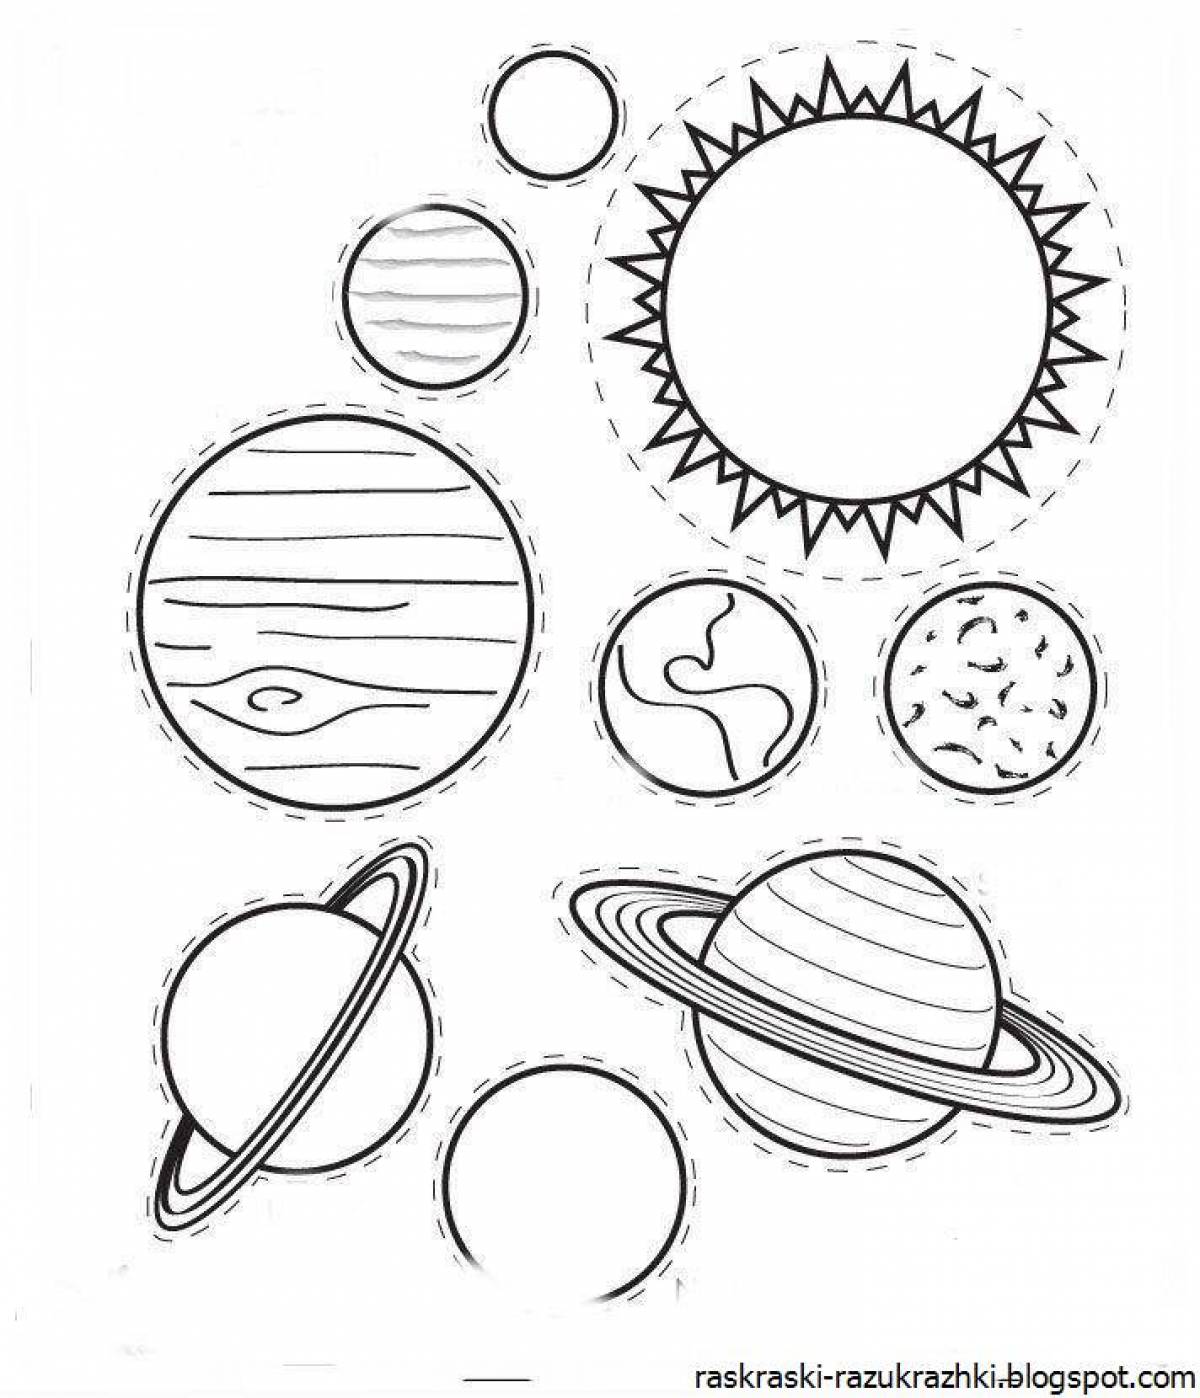 Planets of the solar system for children #12